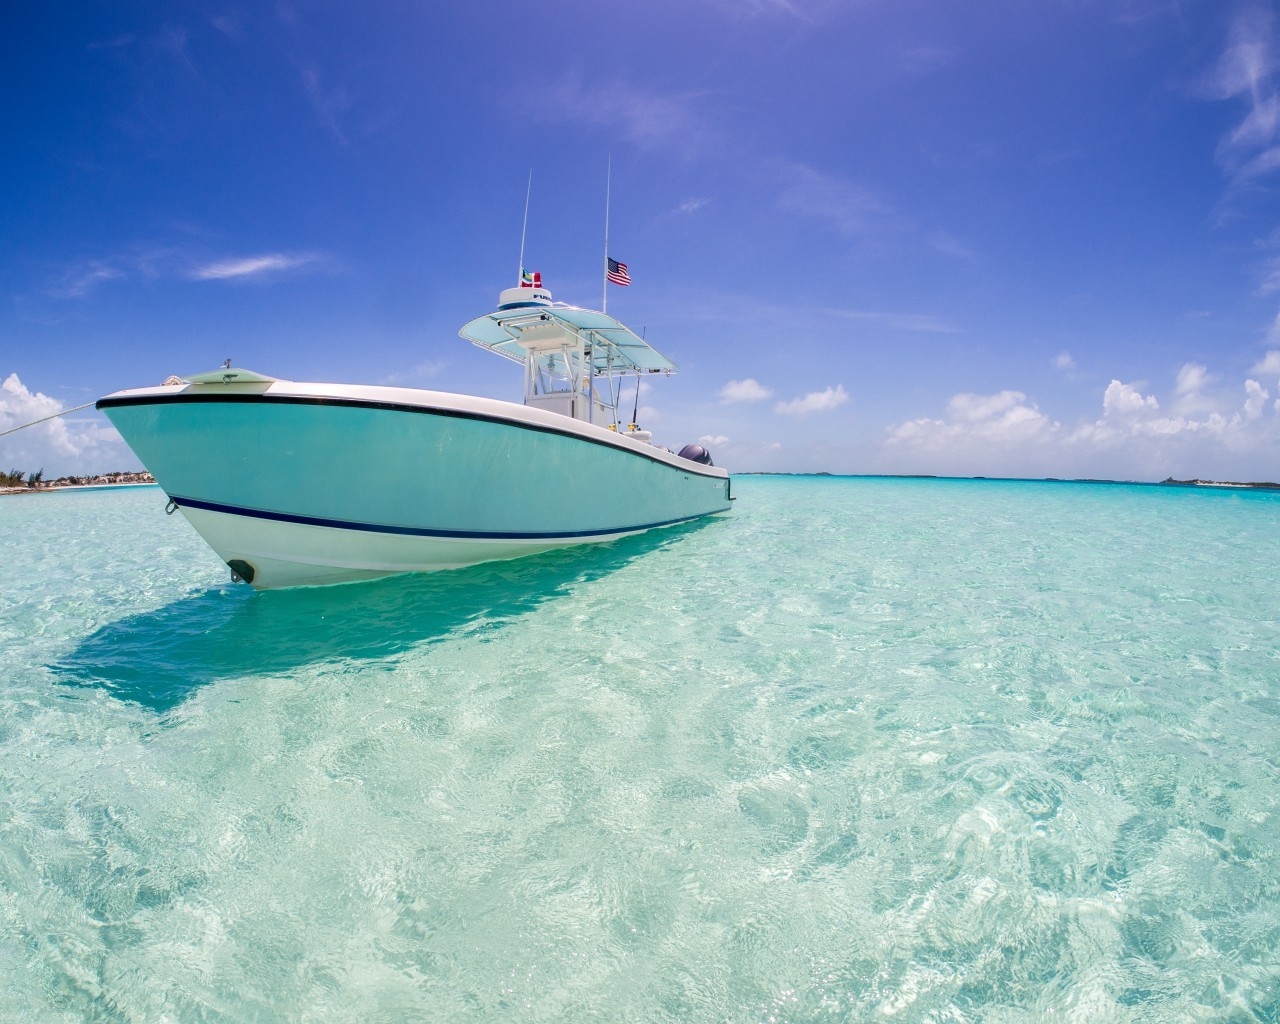 Boat in Paradise for 1280 x 1024 resolution